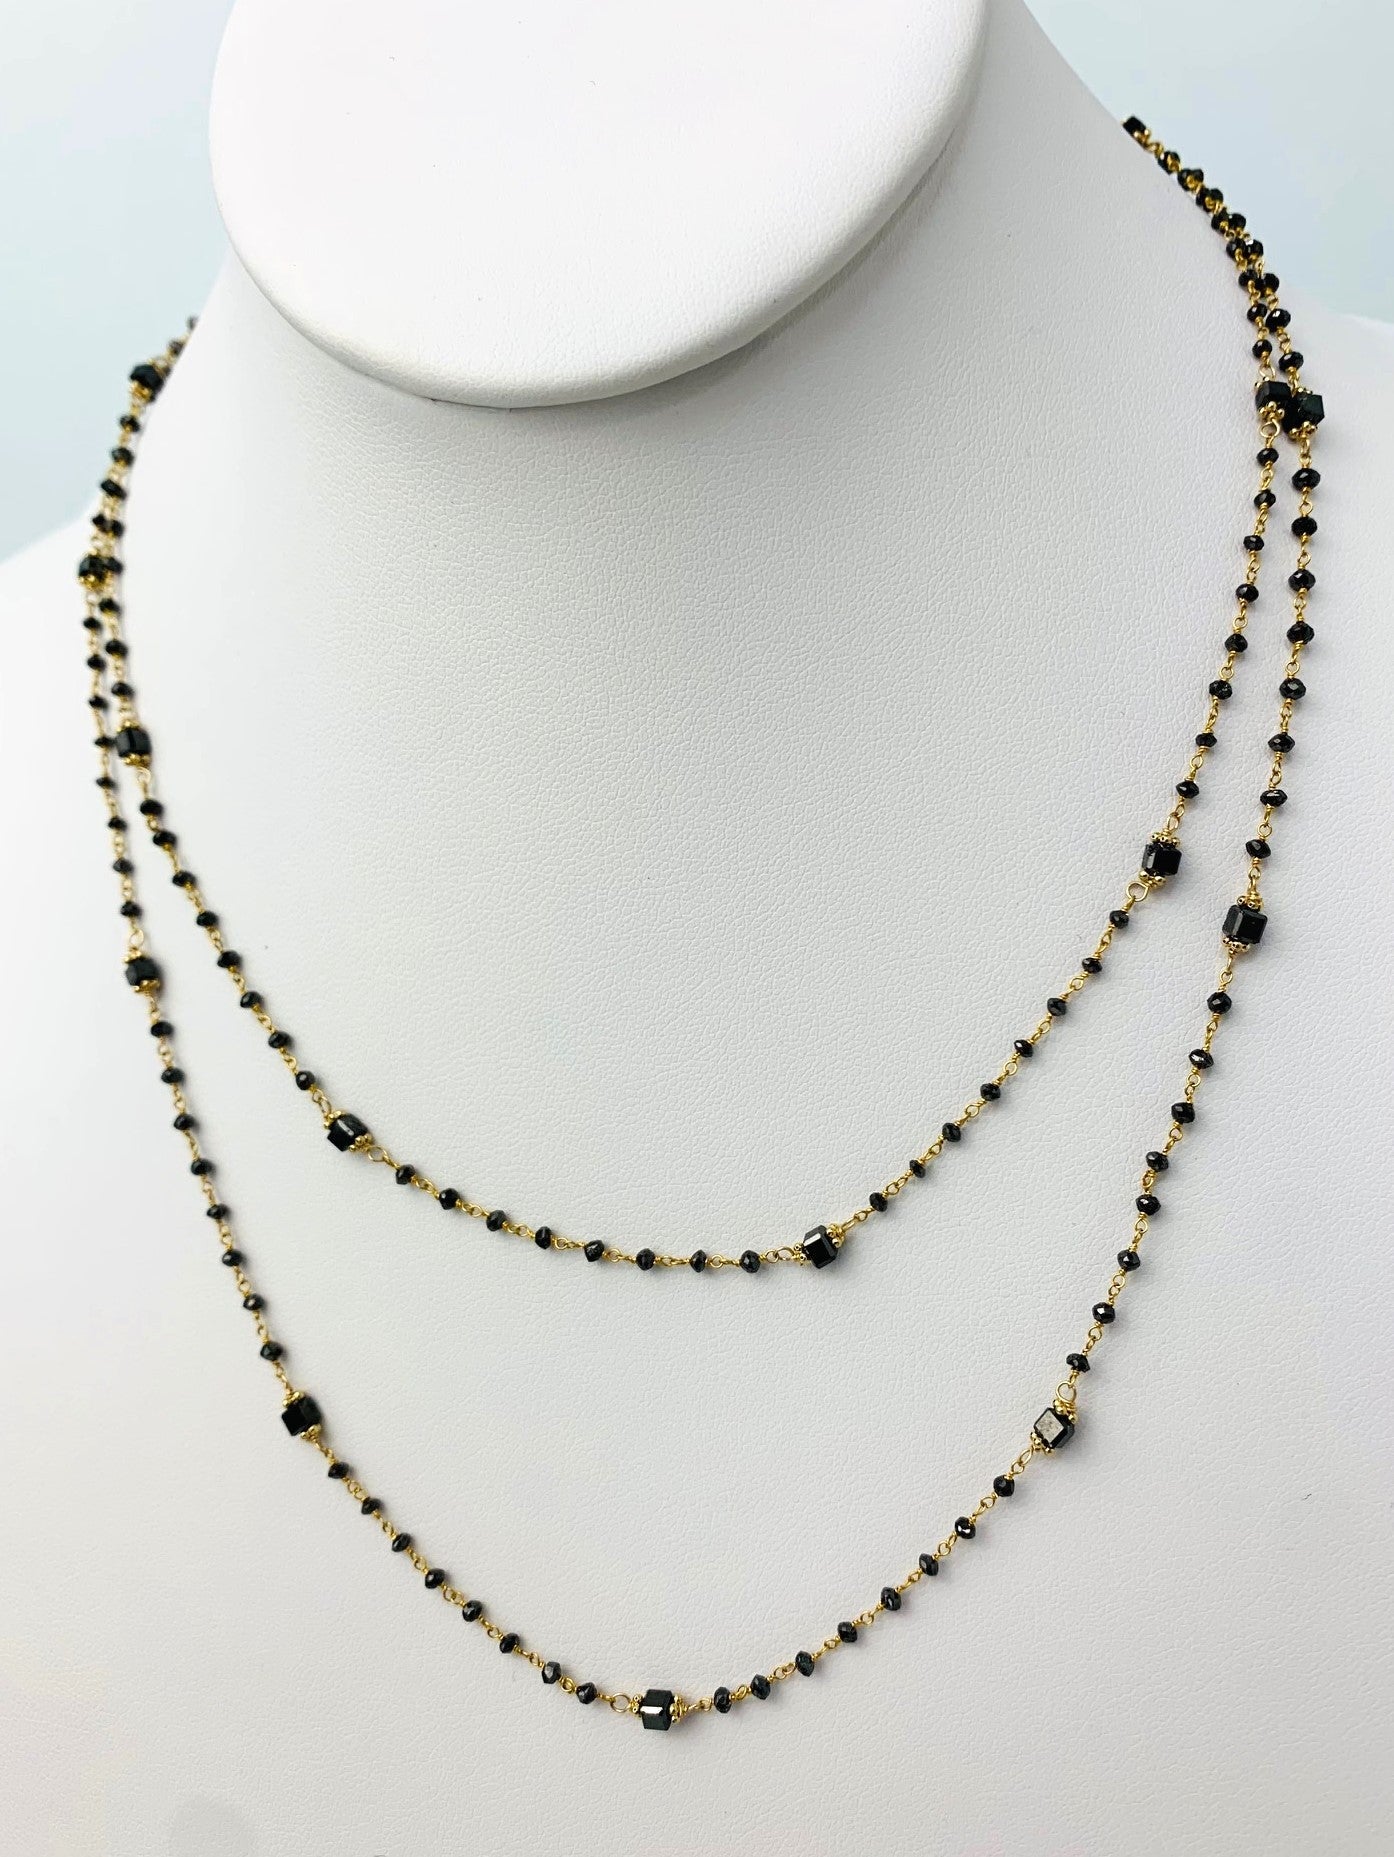 37" Black Diamond Rosary Necklace With Cube Diamond Accents in 14KY - NCK-271-ROSDIA14Y-BK-37A